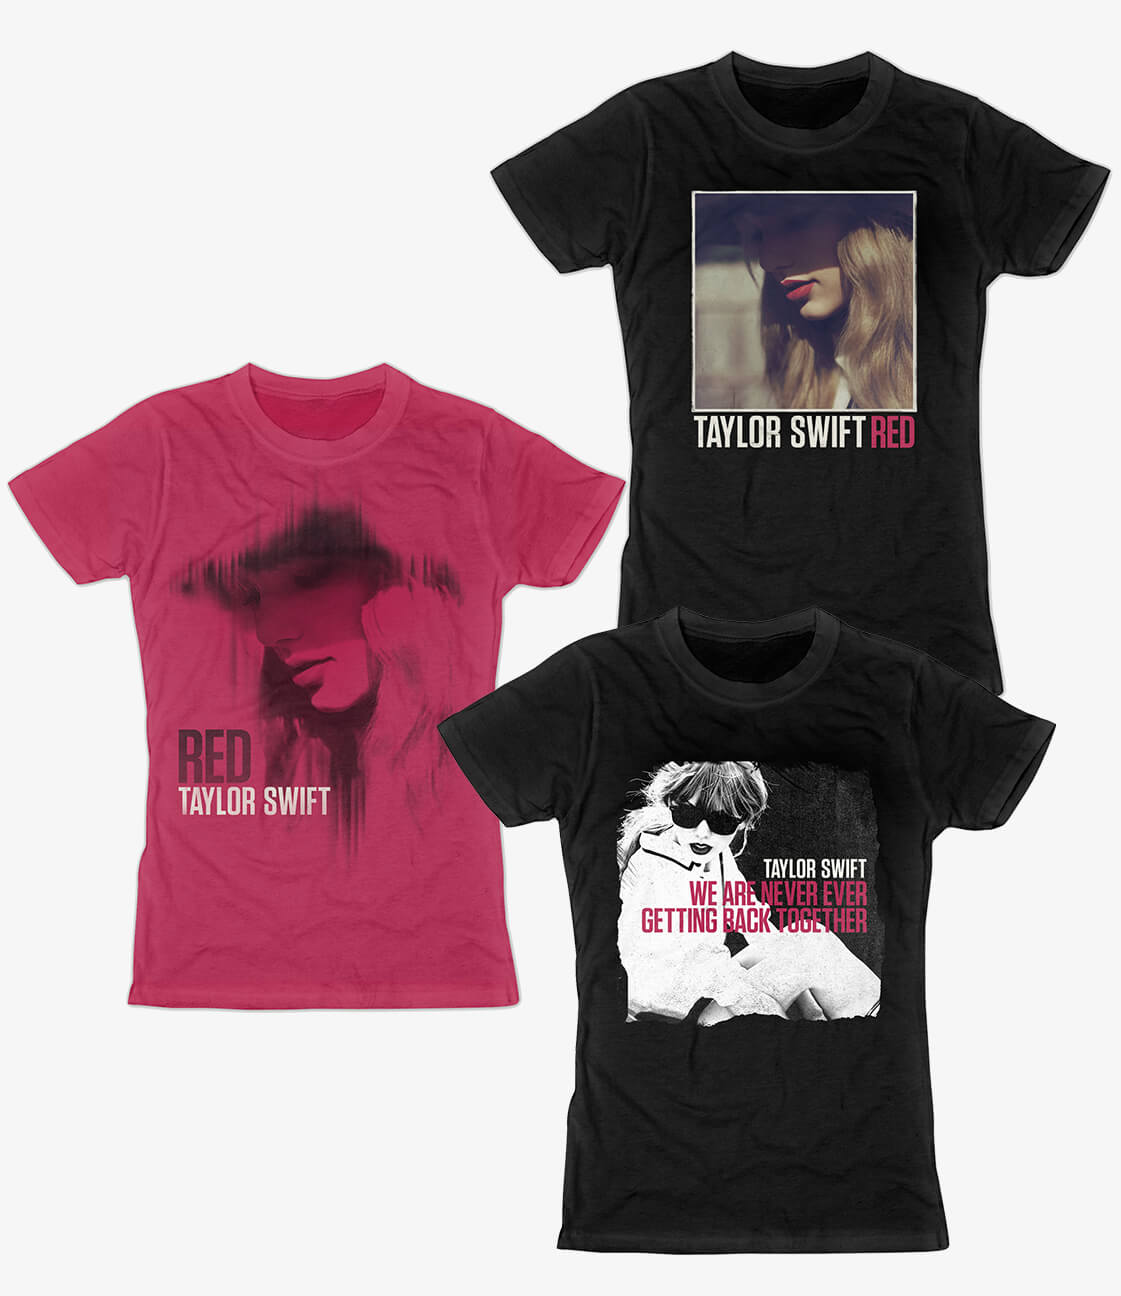 Taylor Swift Red Merchandise - ST8MNT BRAND AGENCY1121 x 1296